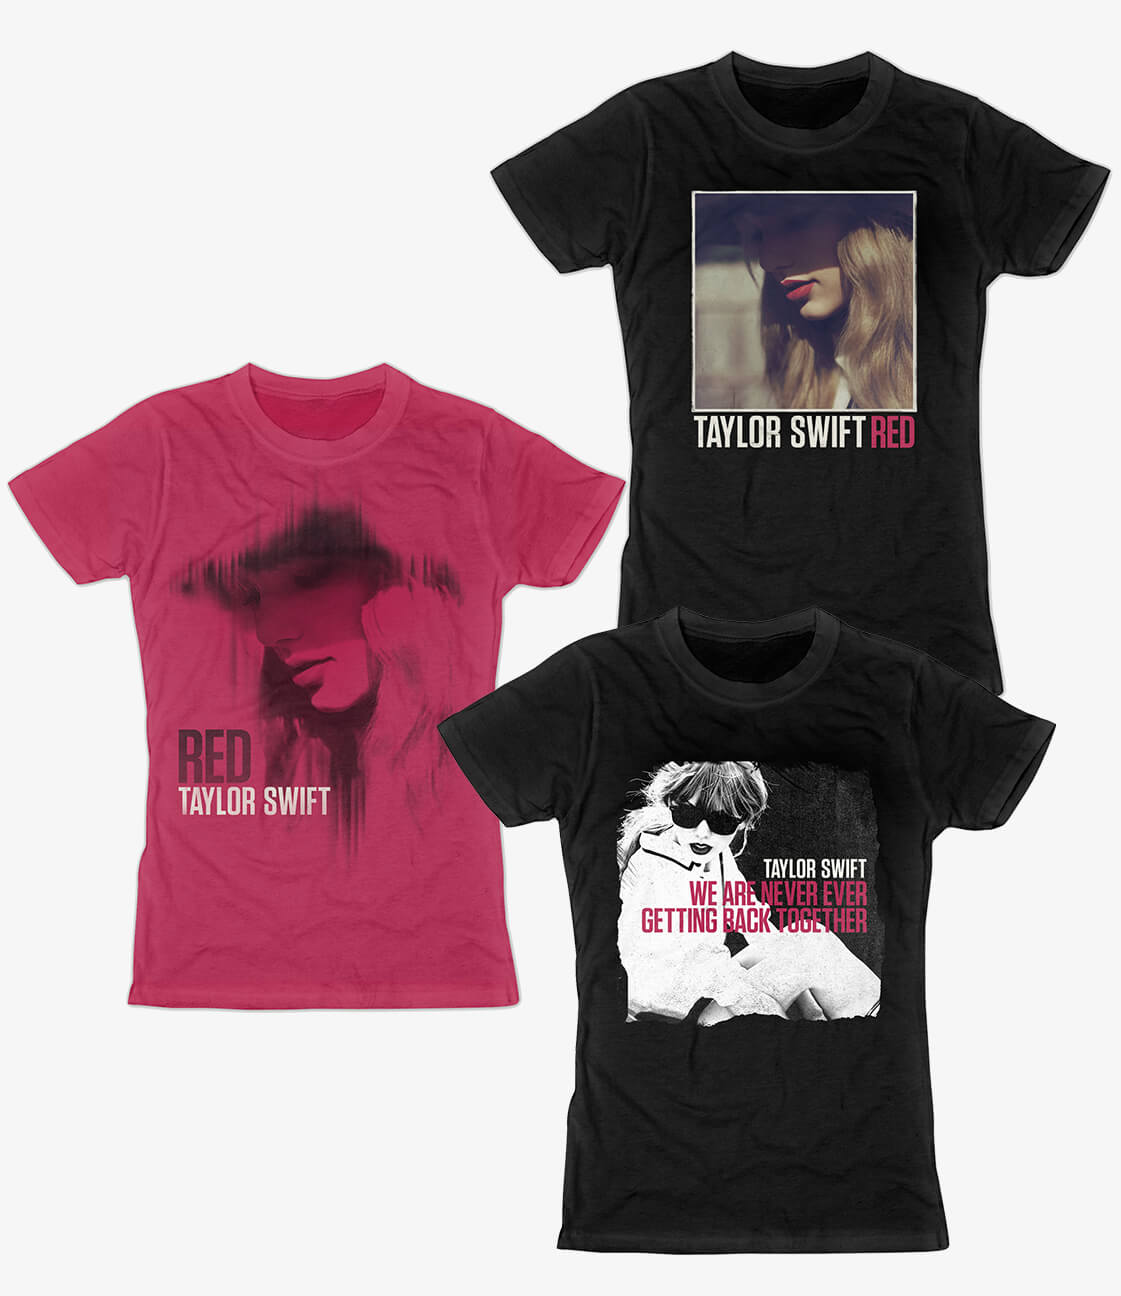 Taylor Swift Red Merchandise - ST8MNT BRAND AGENCY1121 x 1296